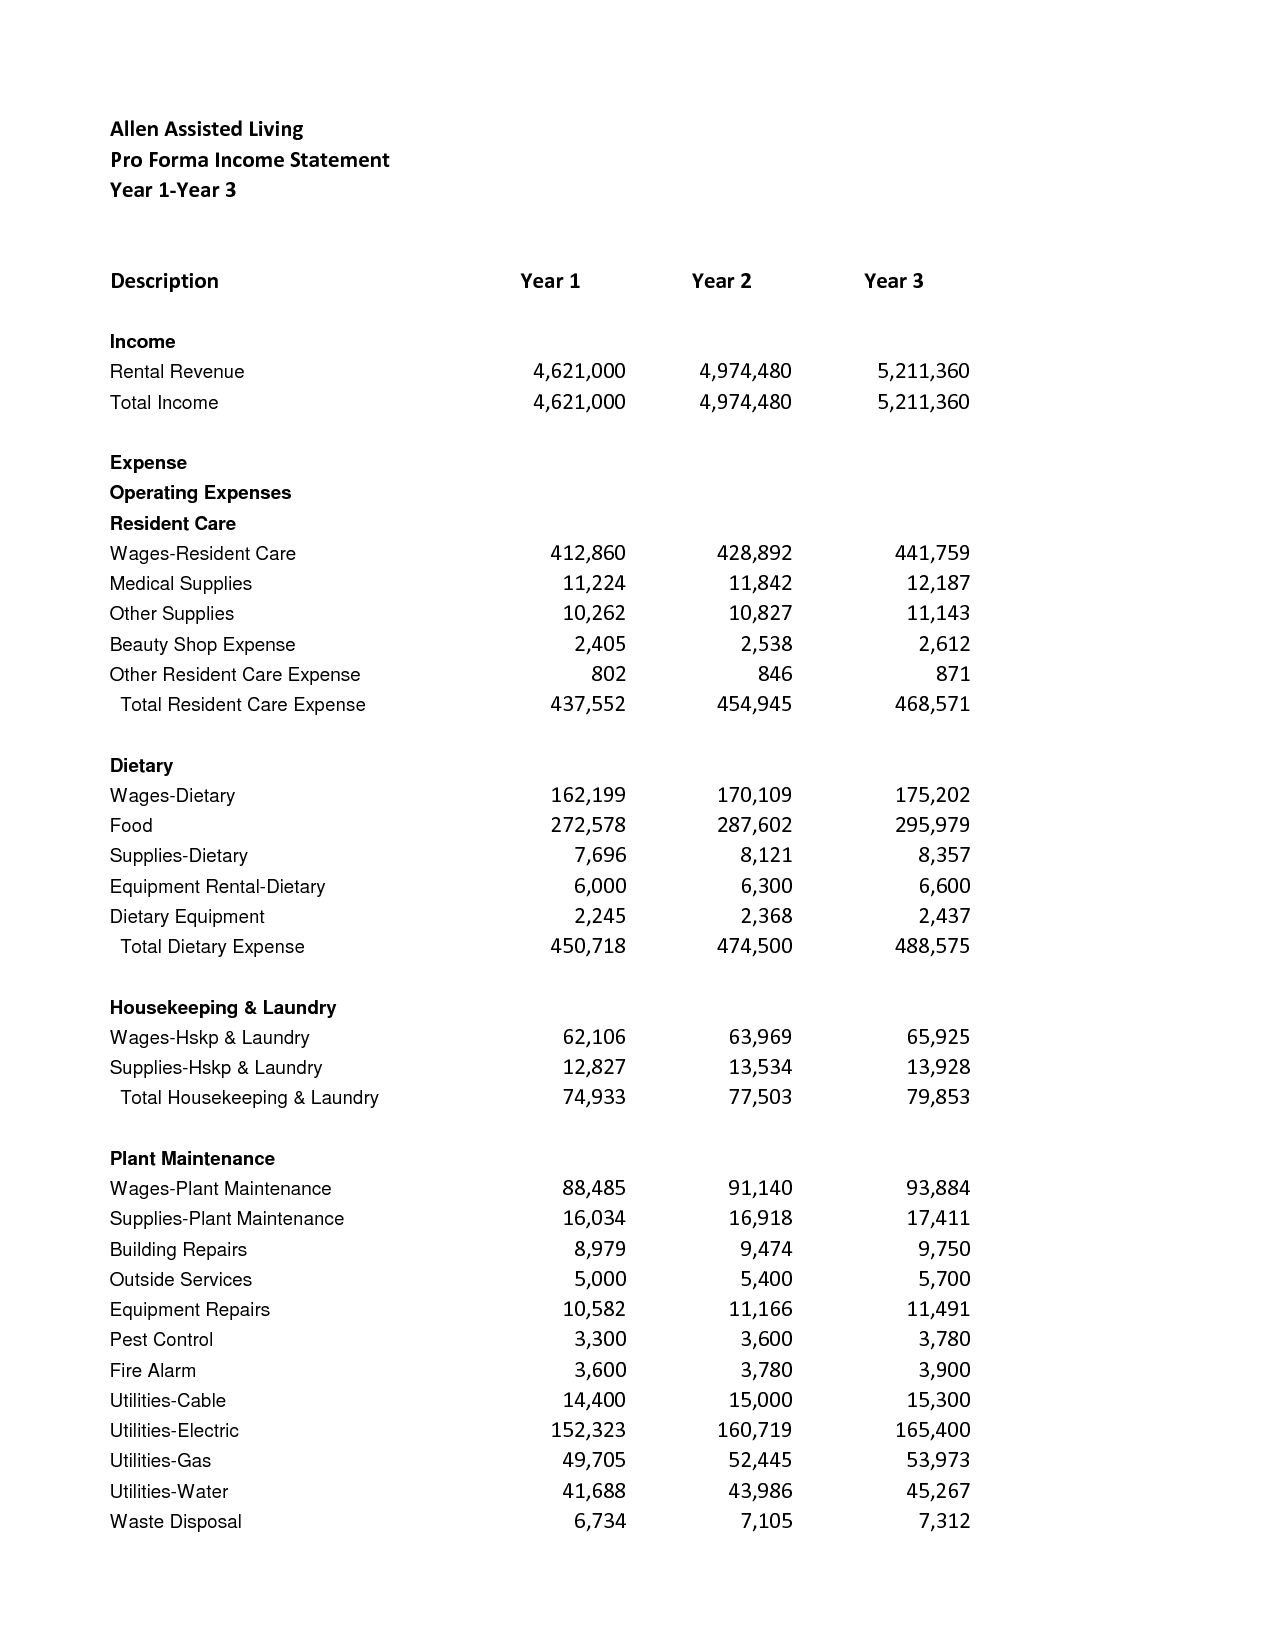 3 Year Pro Forma Income Statement Image